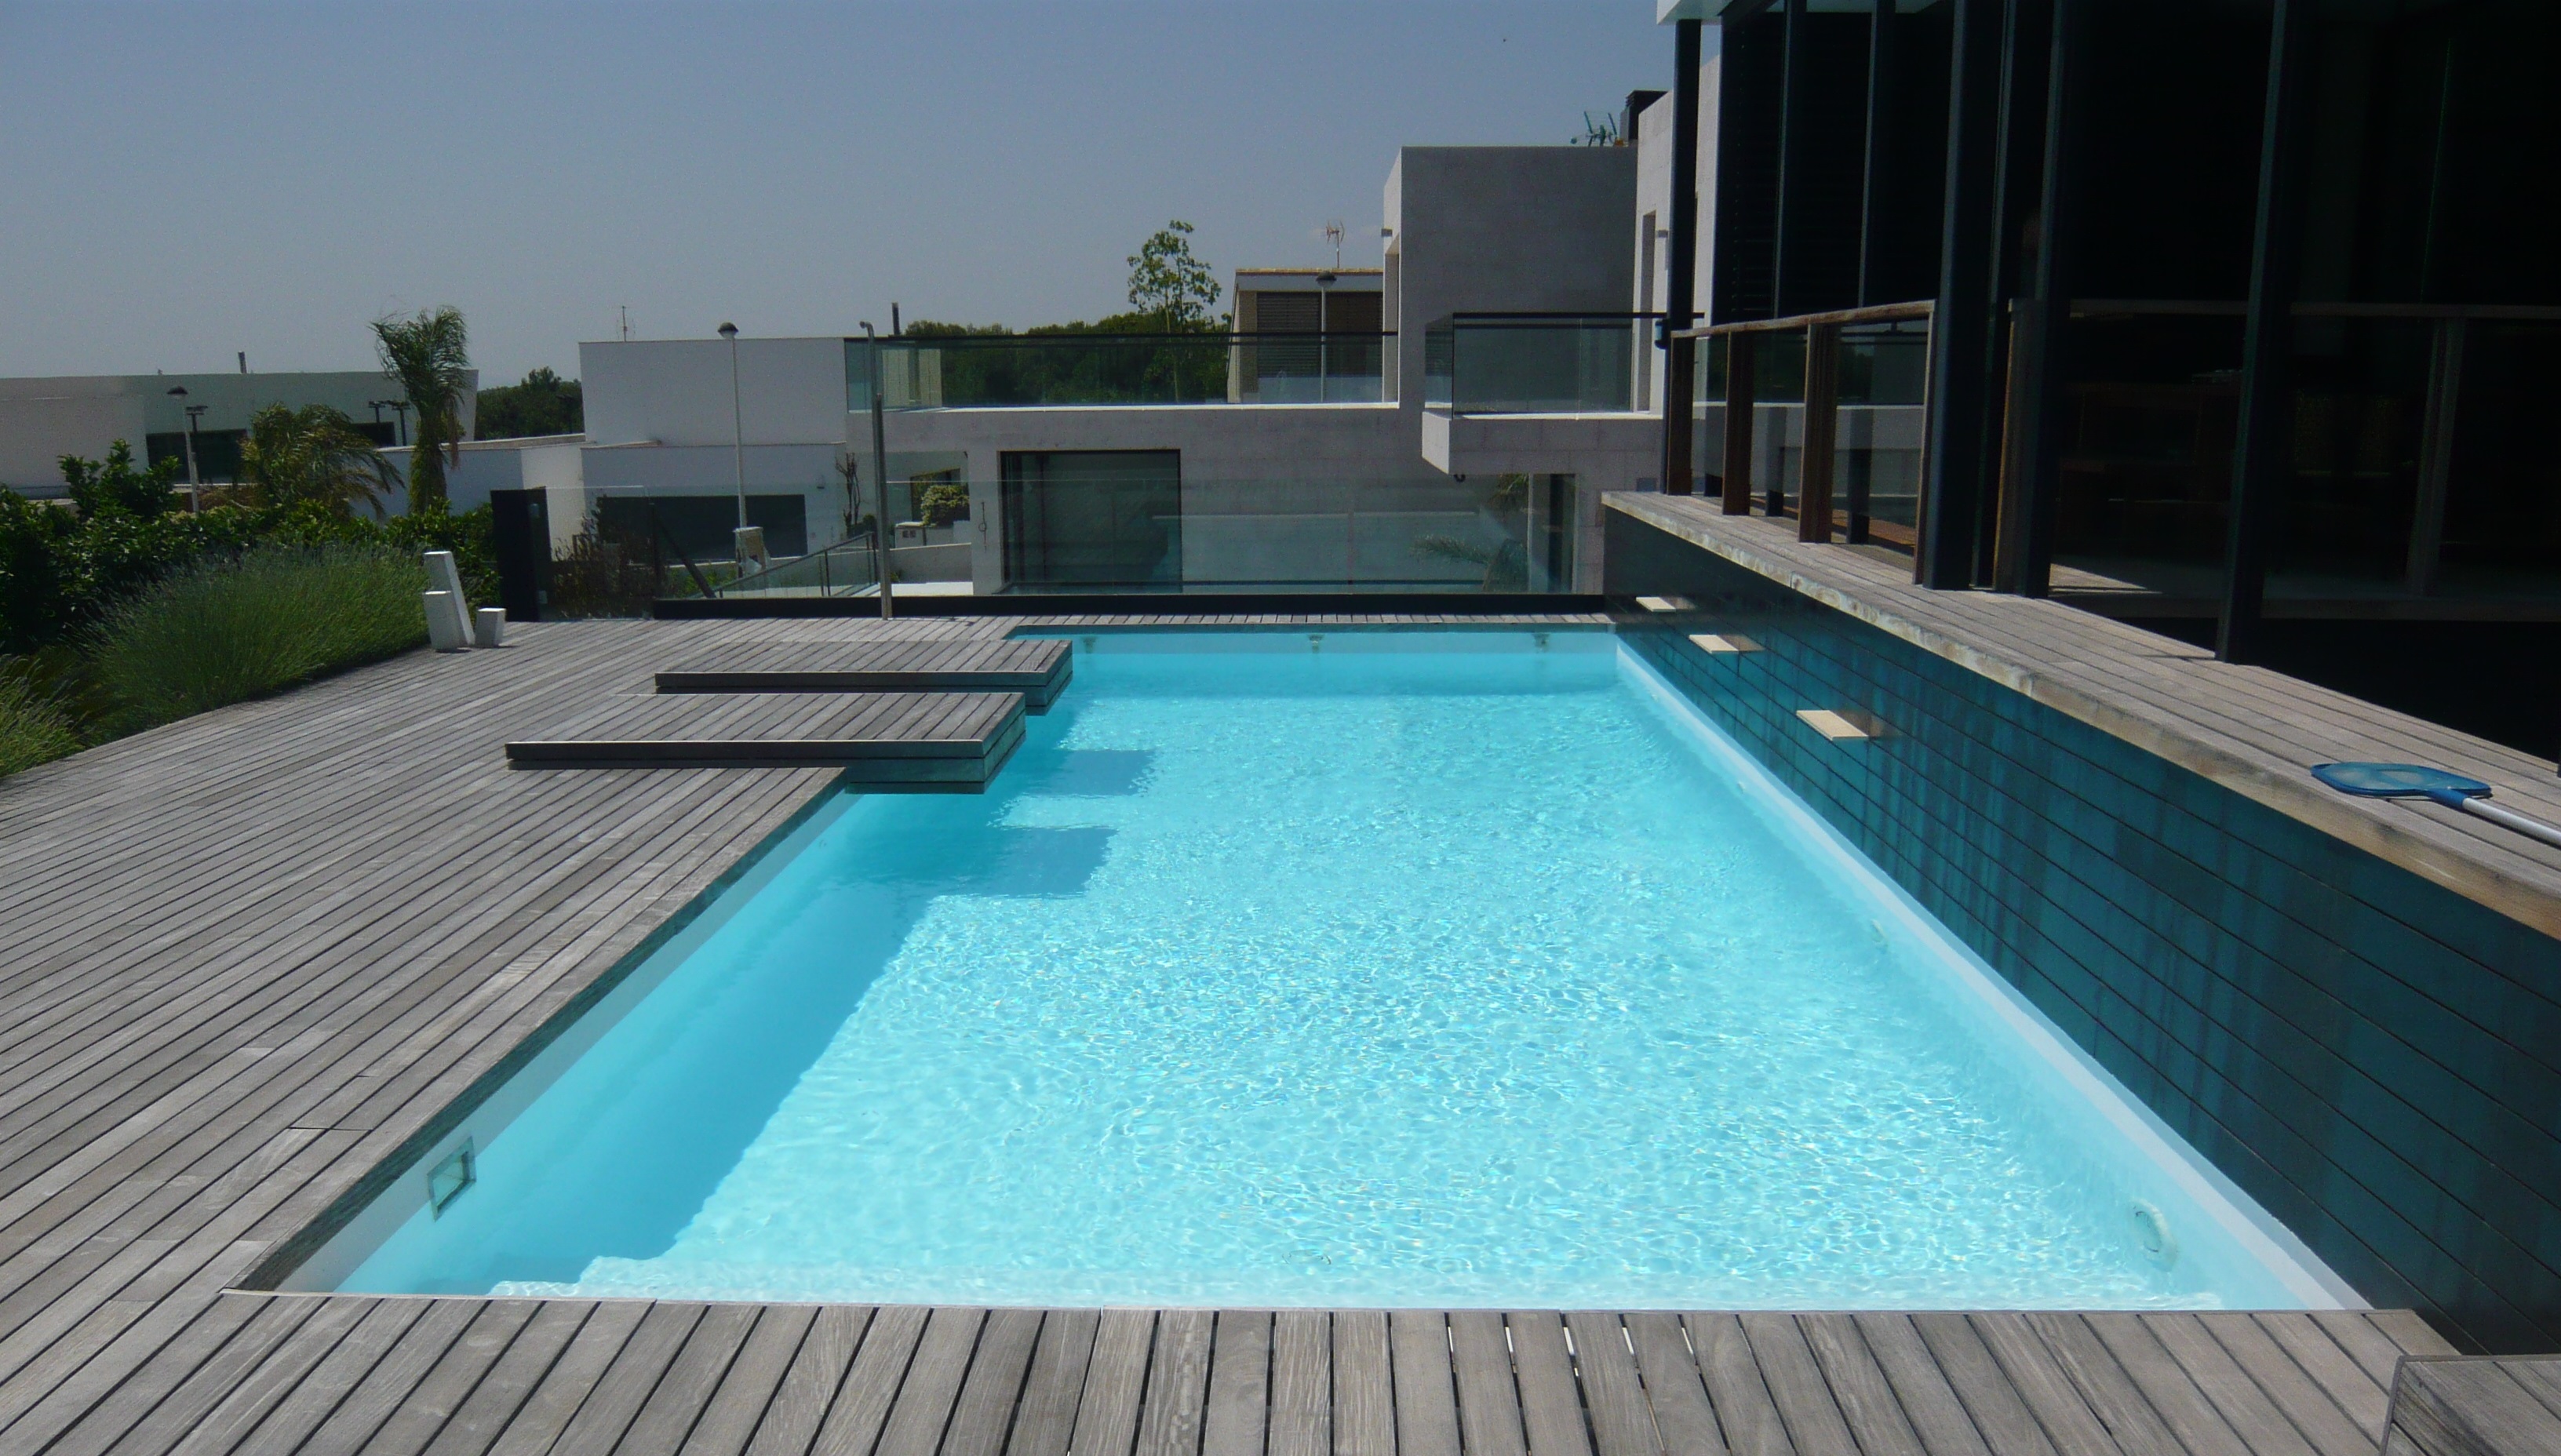 Topciment wood microcement swimming pool